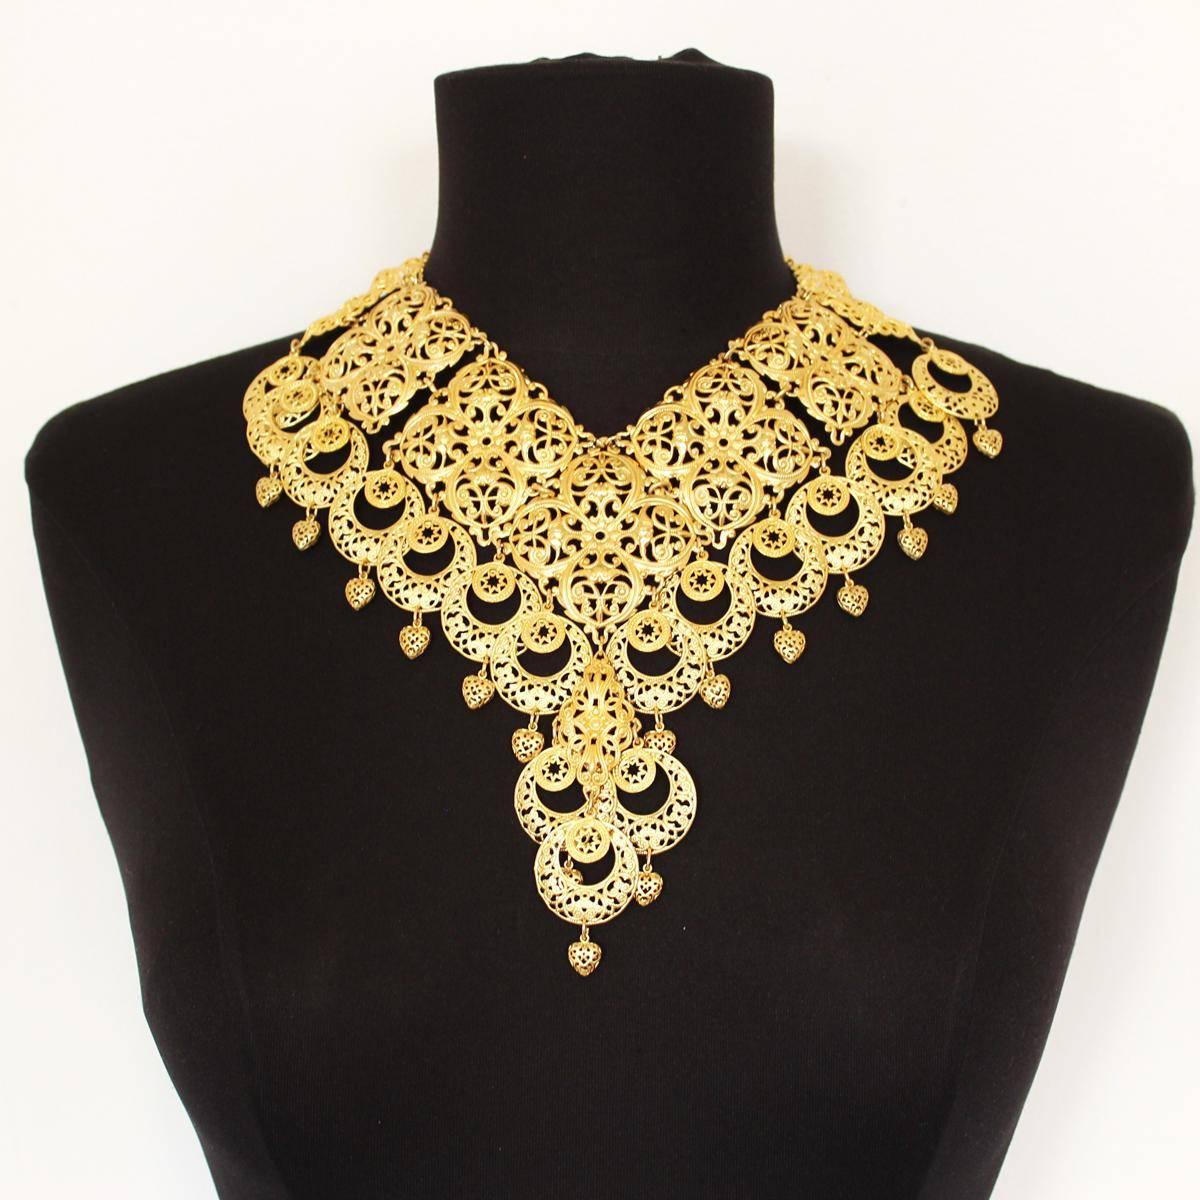 Superb masterpiece by Carlo Zini
One of the world greatest bijoux designers
Amazing artisanal work
Stunning construction of 18 KT Gold dipped filigree
100% Artisanal work, made in Milan
Such a luxury and chic piece, would give preciousness to every